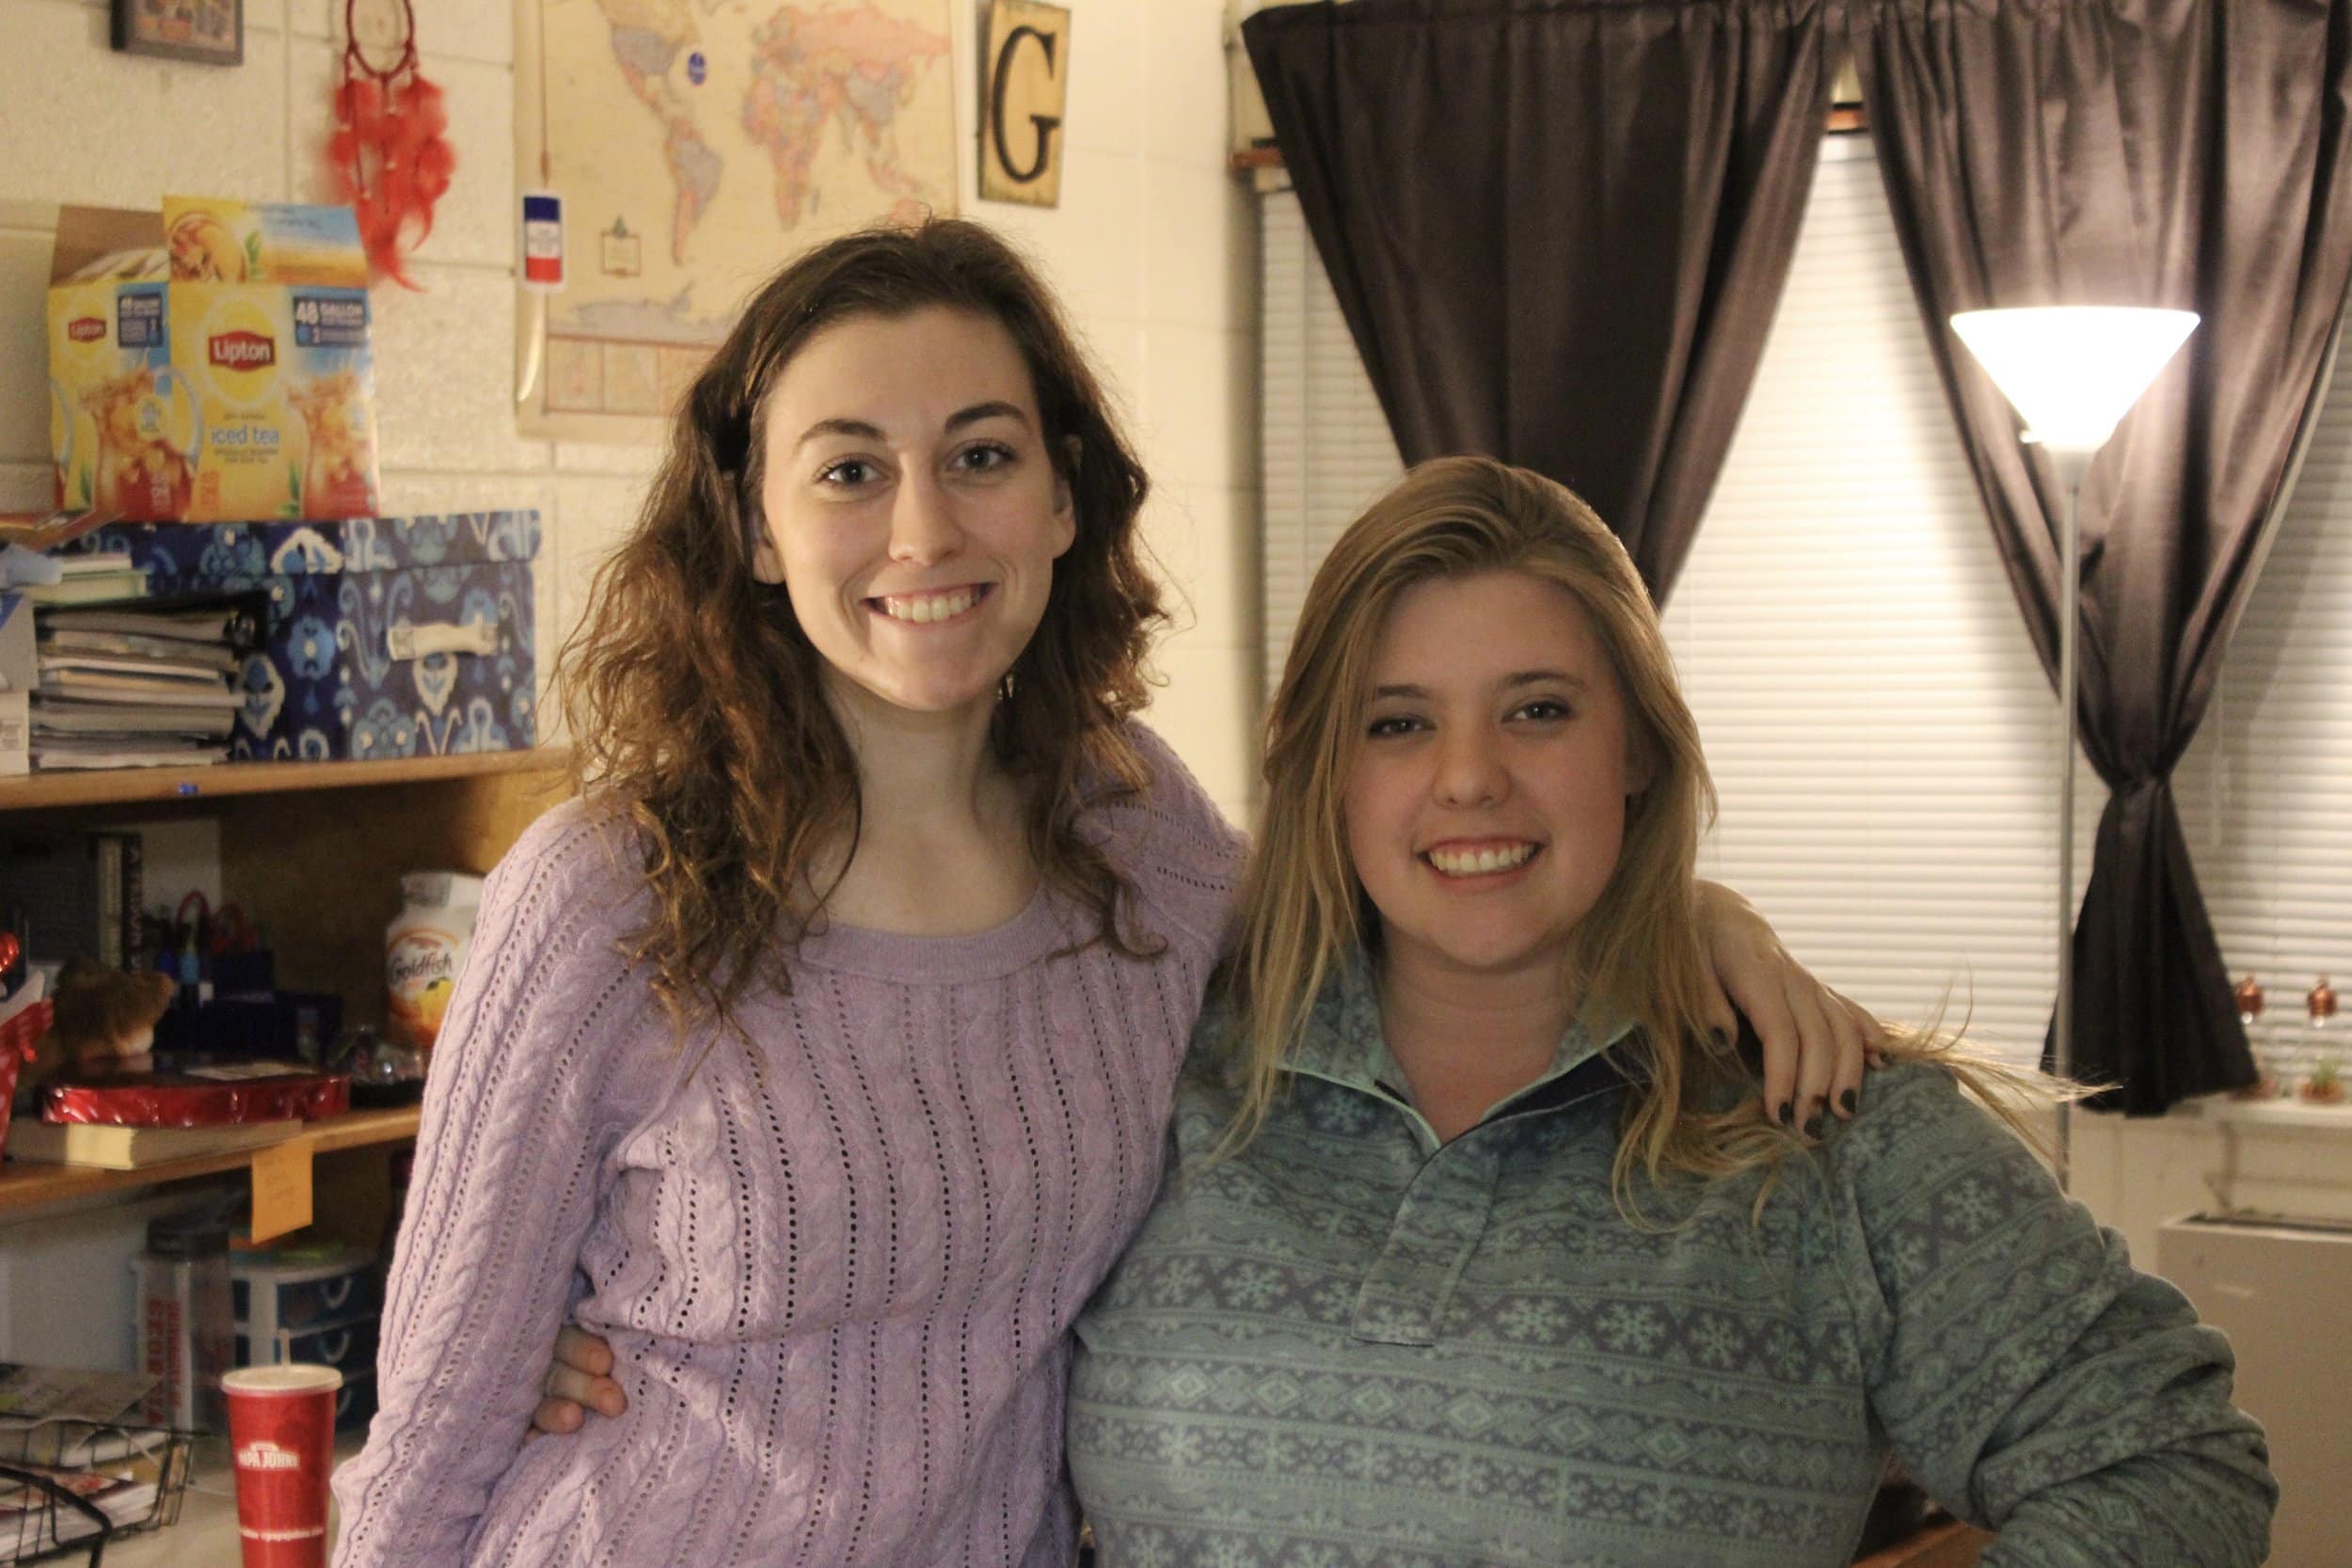 Anna Clair and her bestie Rachel Buko, both biology majors, waiti on more friends to arrive for open dorms.